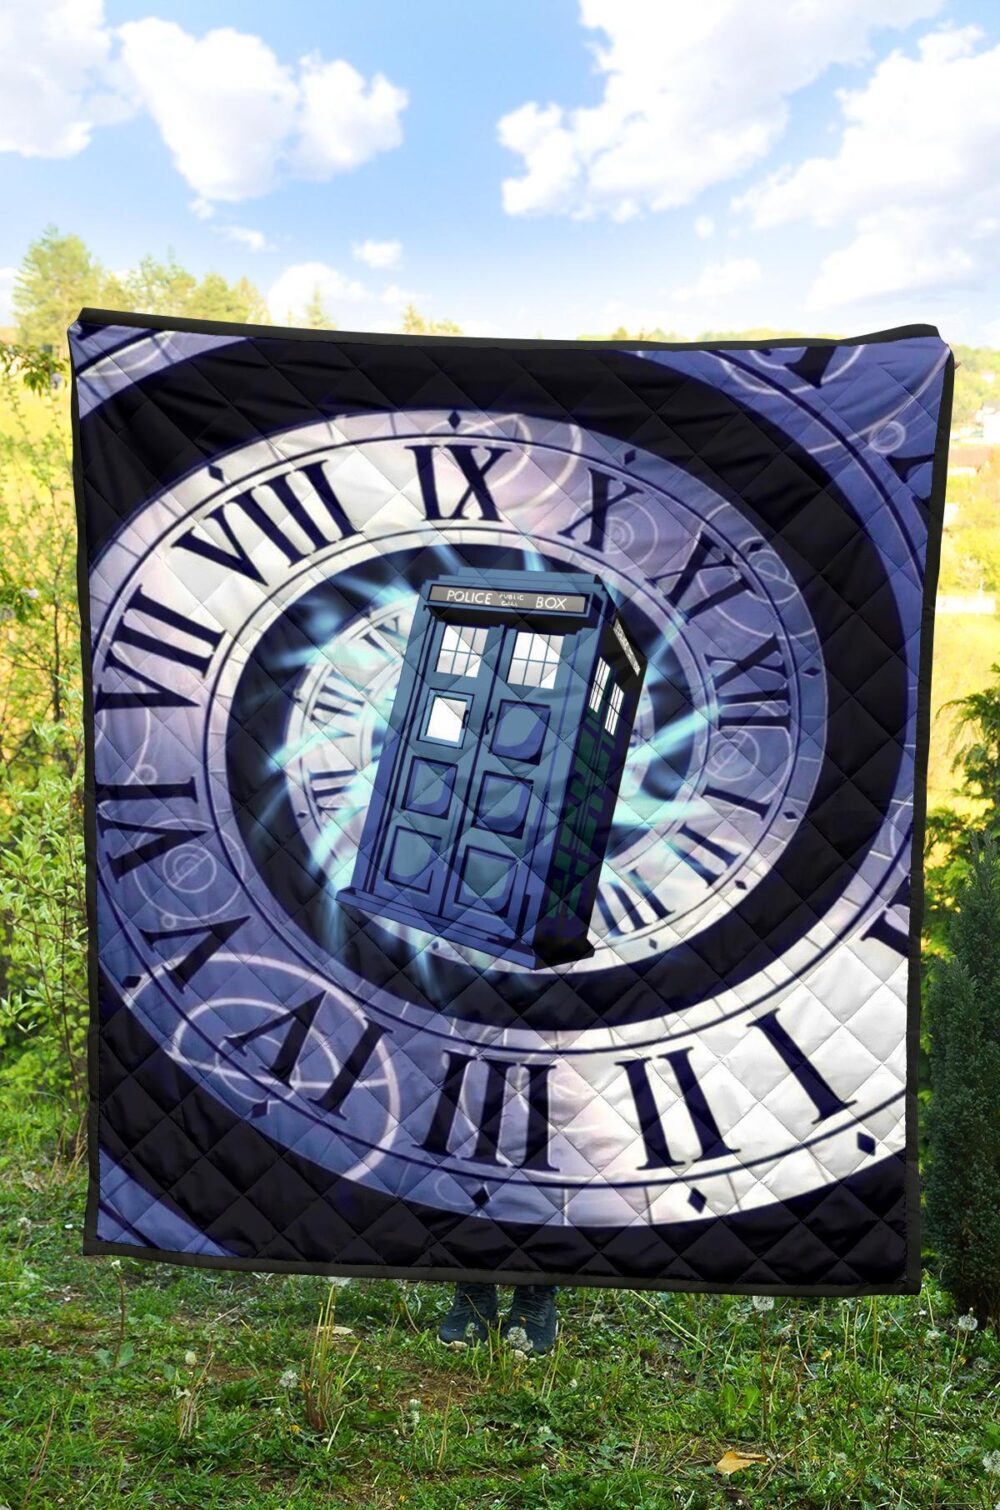 Doctor Who Tardis Quilt Blanket Funny Gift Idea For Fan